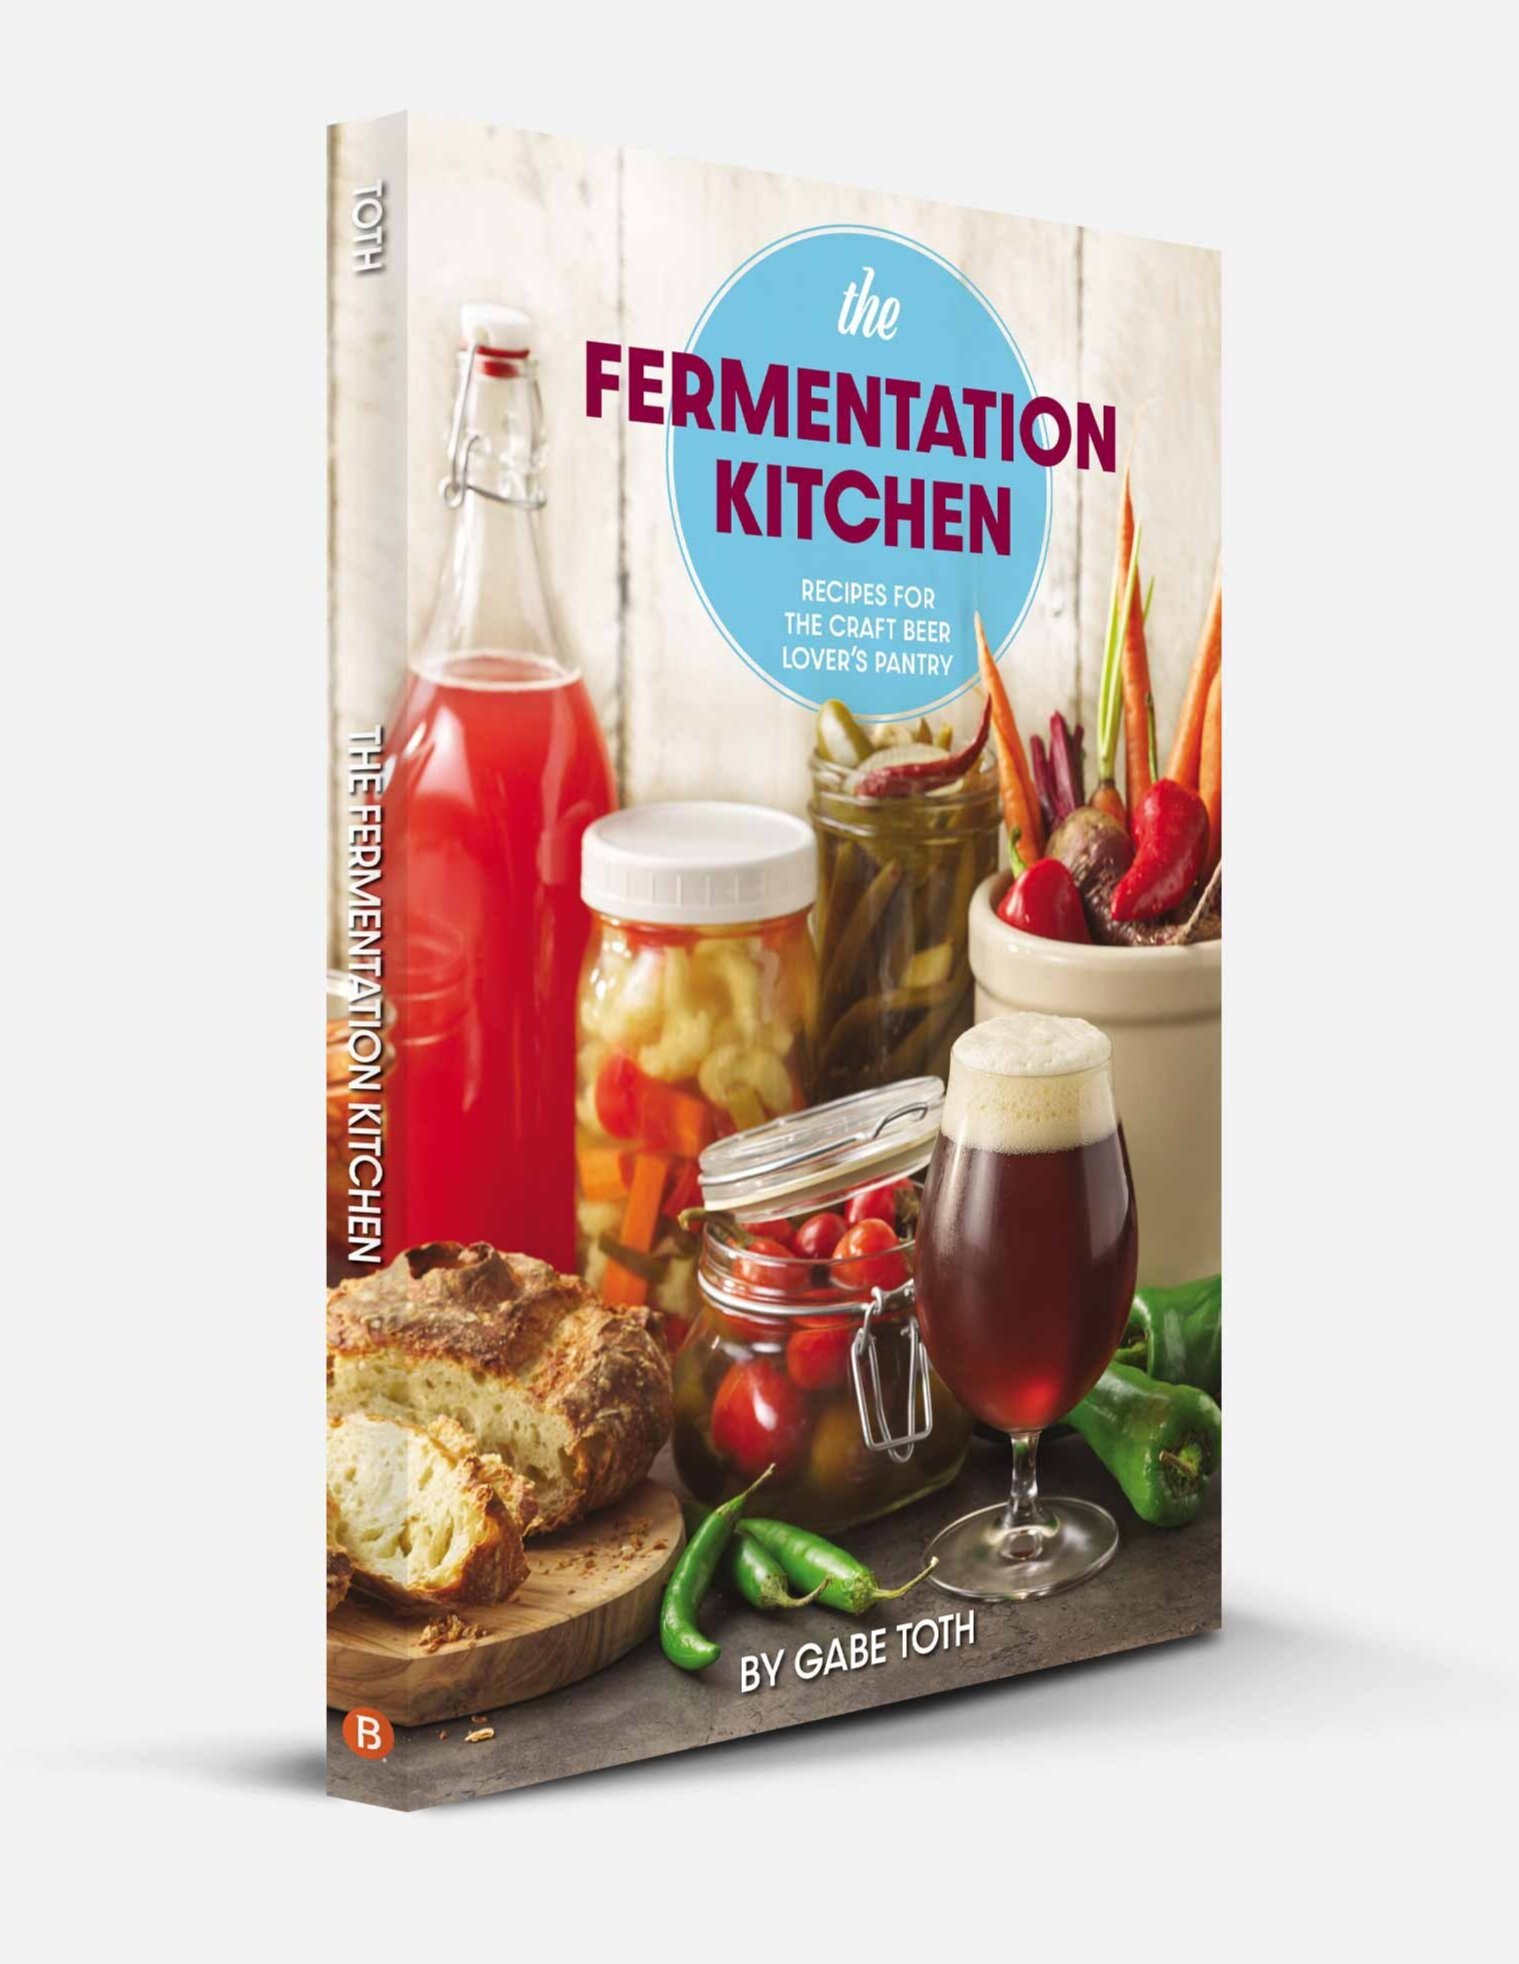 The Fermentation Kitchen Recipes for the Craft Beer Lovers Pantry — New School Beer + Cider